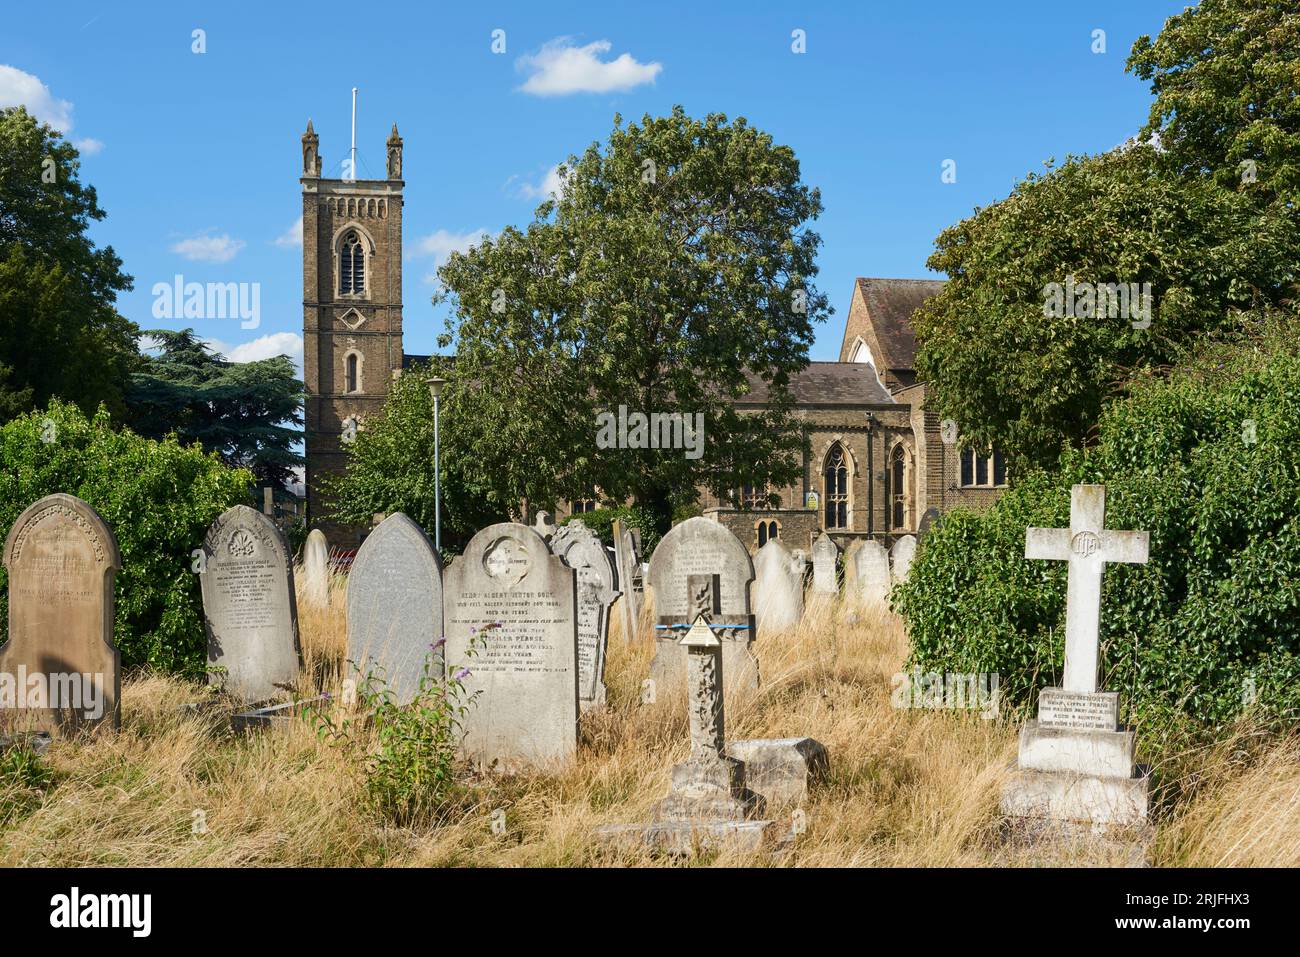 The early 19th century church of St Mary the Virgin, Ilford, East London UK, viewed from the adjoining Great Ilford cemetery Stock Photo